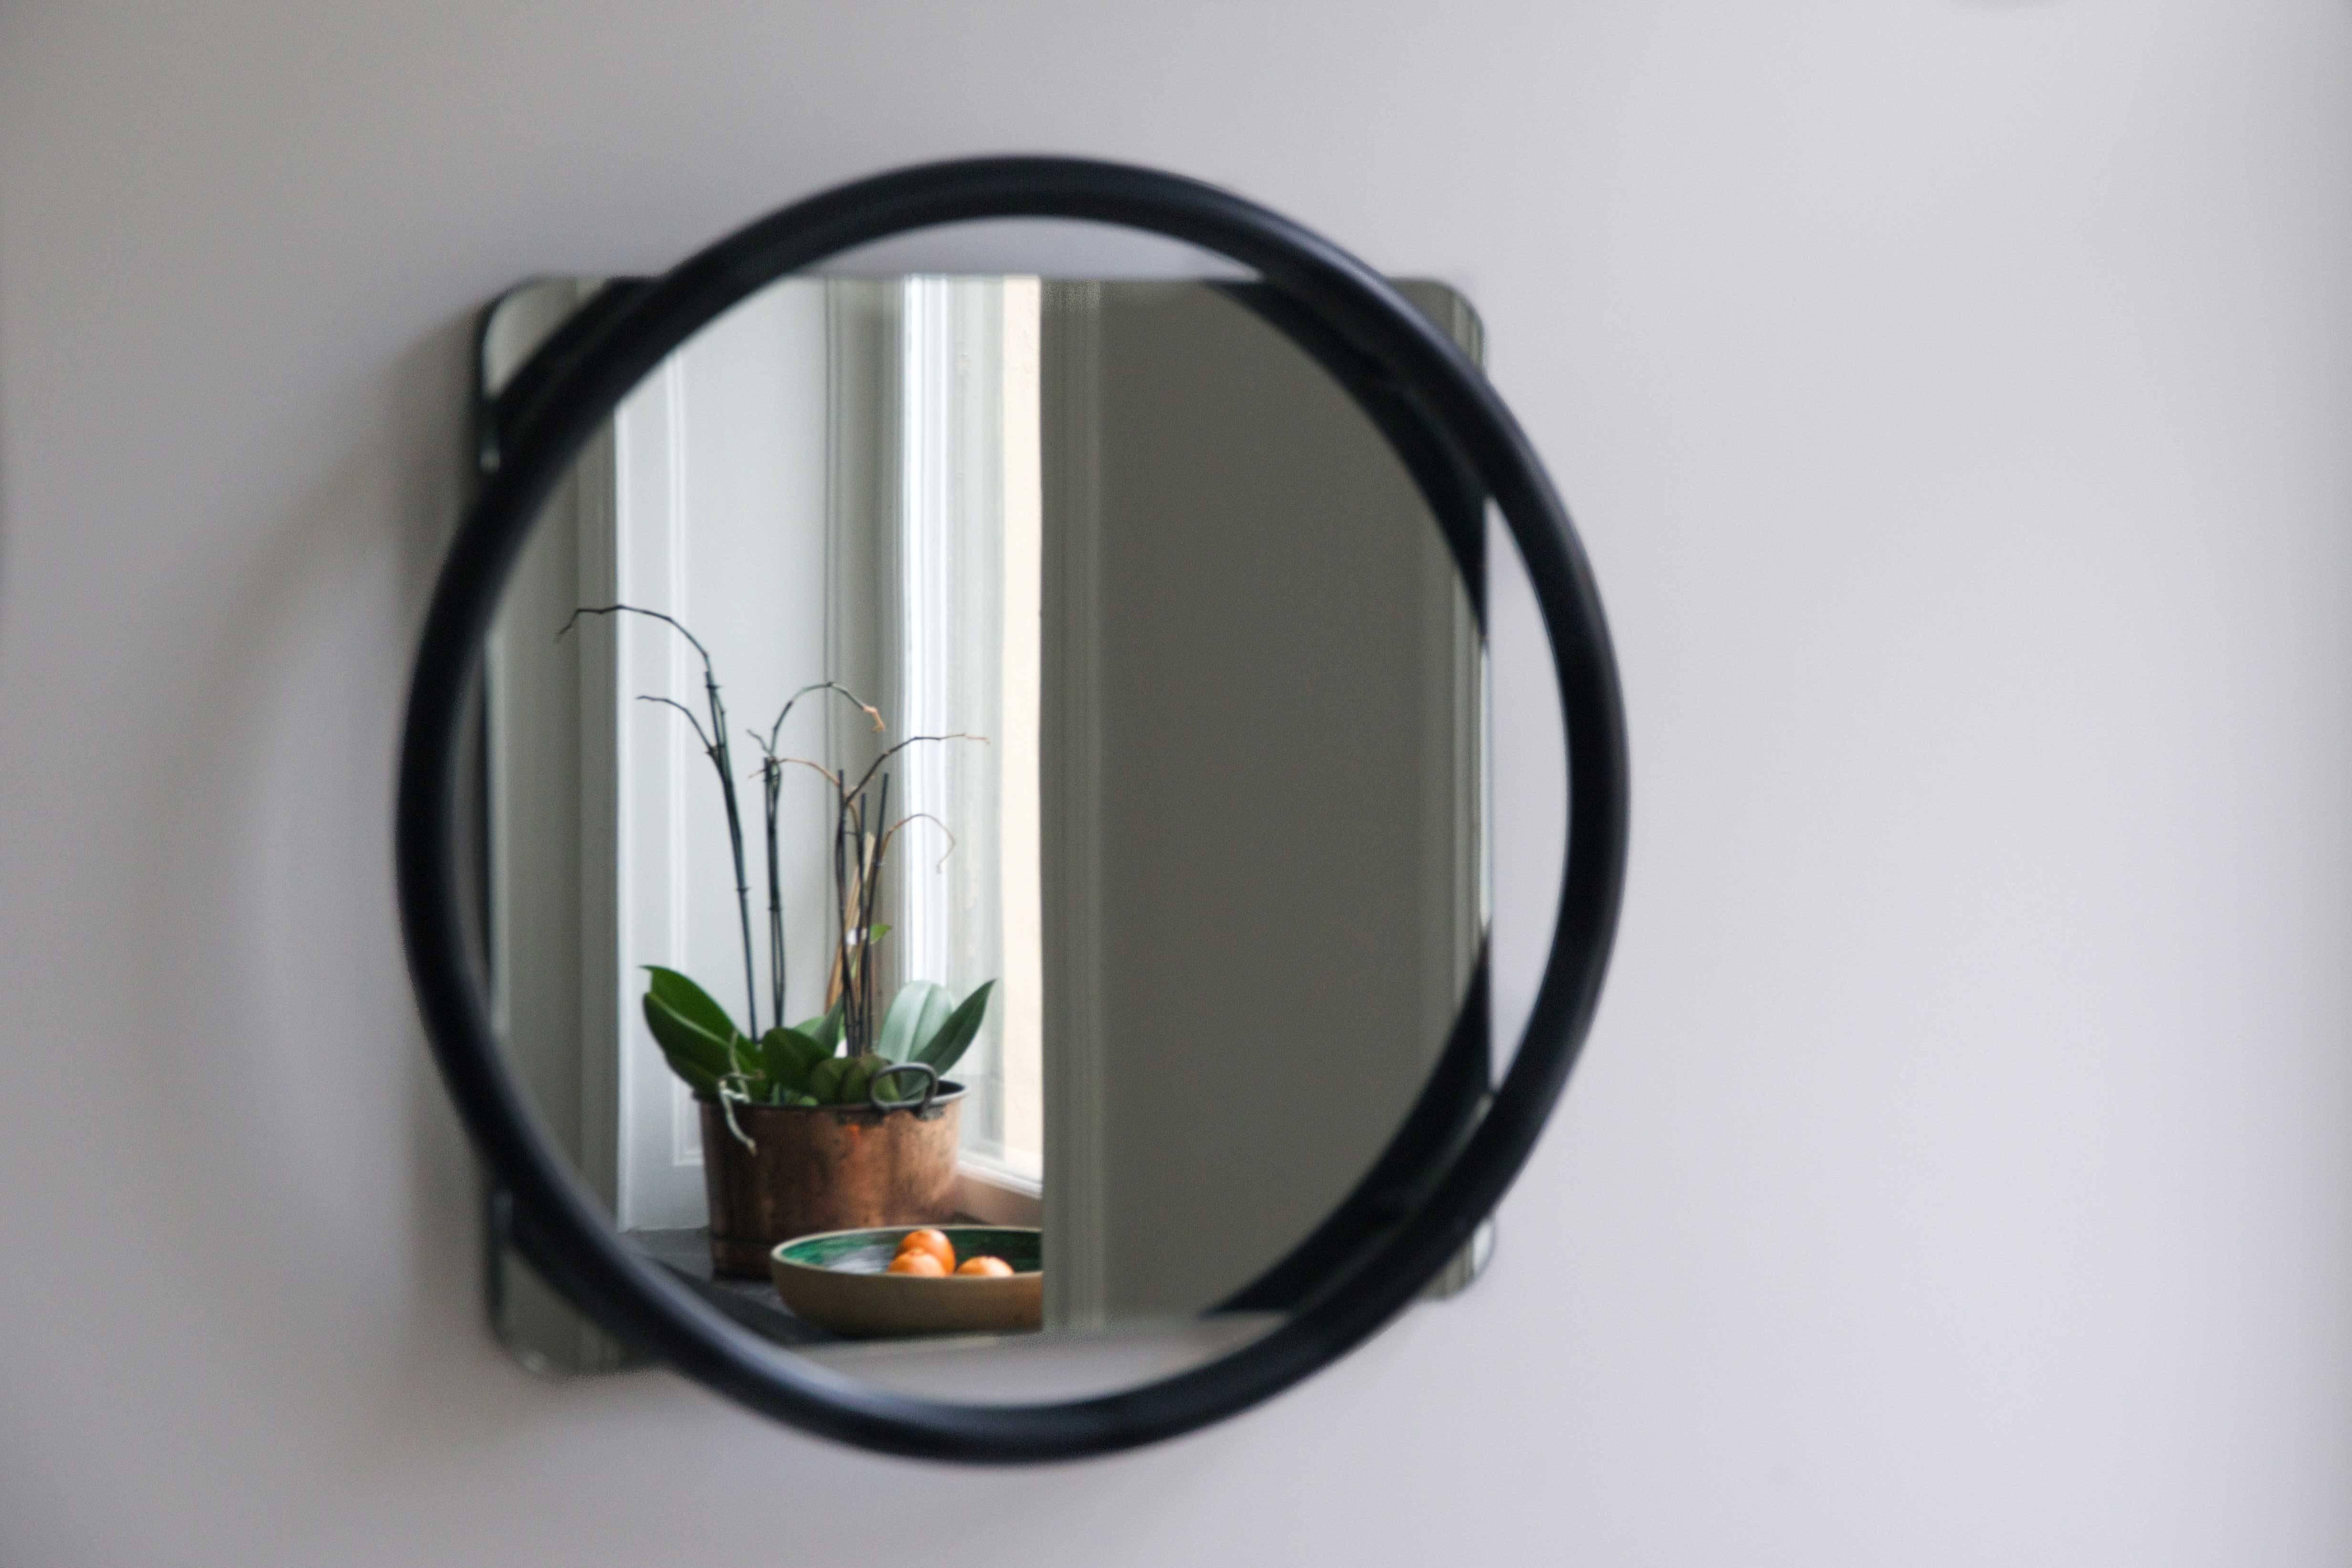 As part of the Vima collection, the Vima Mirror stays true to the collection's form and language by keeping the thick and bold circular structure. The circular tube is attached onto the mirror with a 2 centimetre distance and acts as a floating